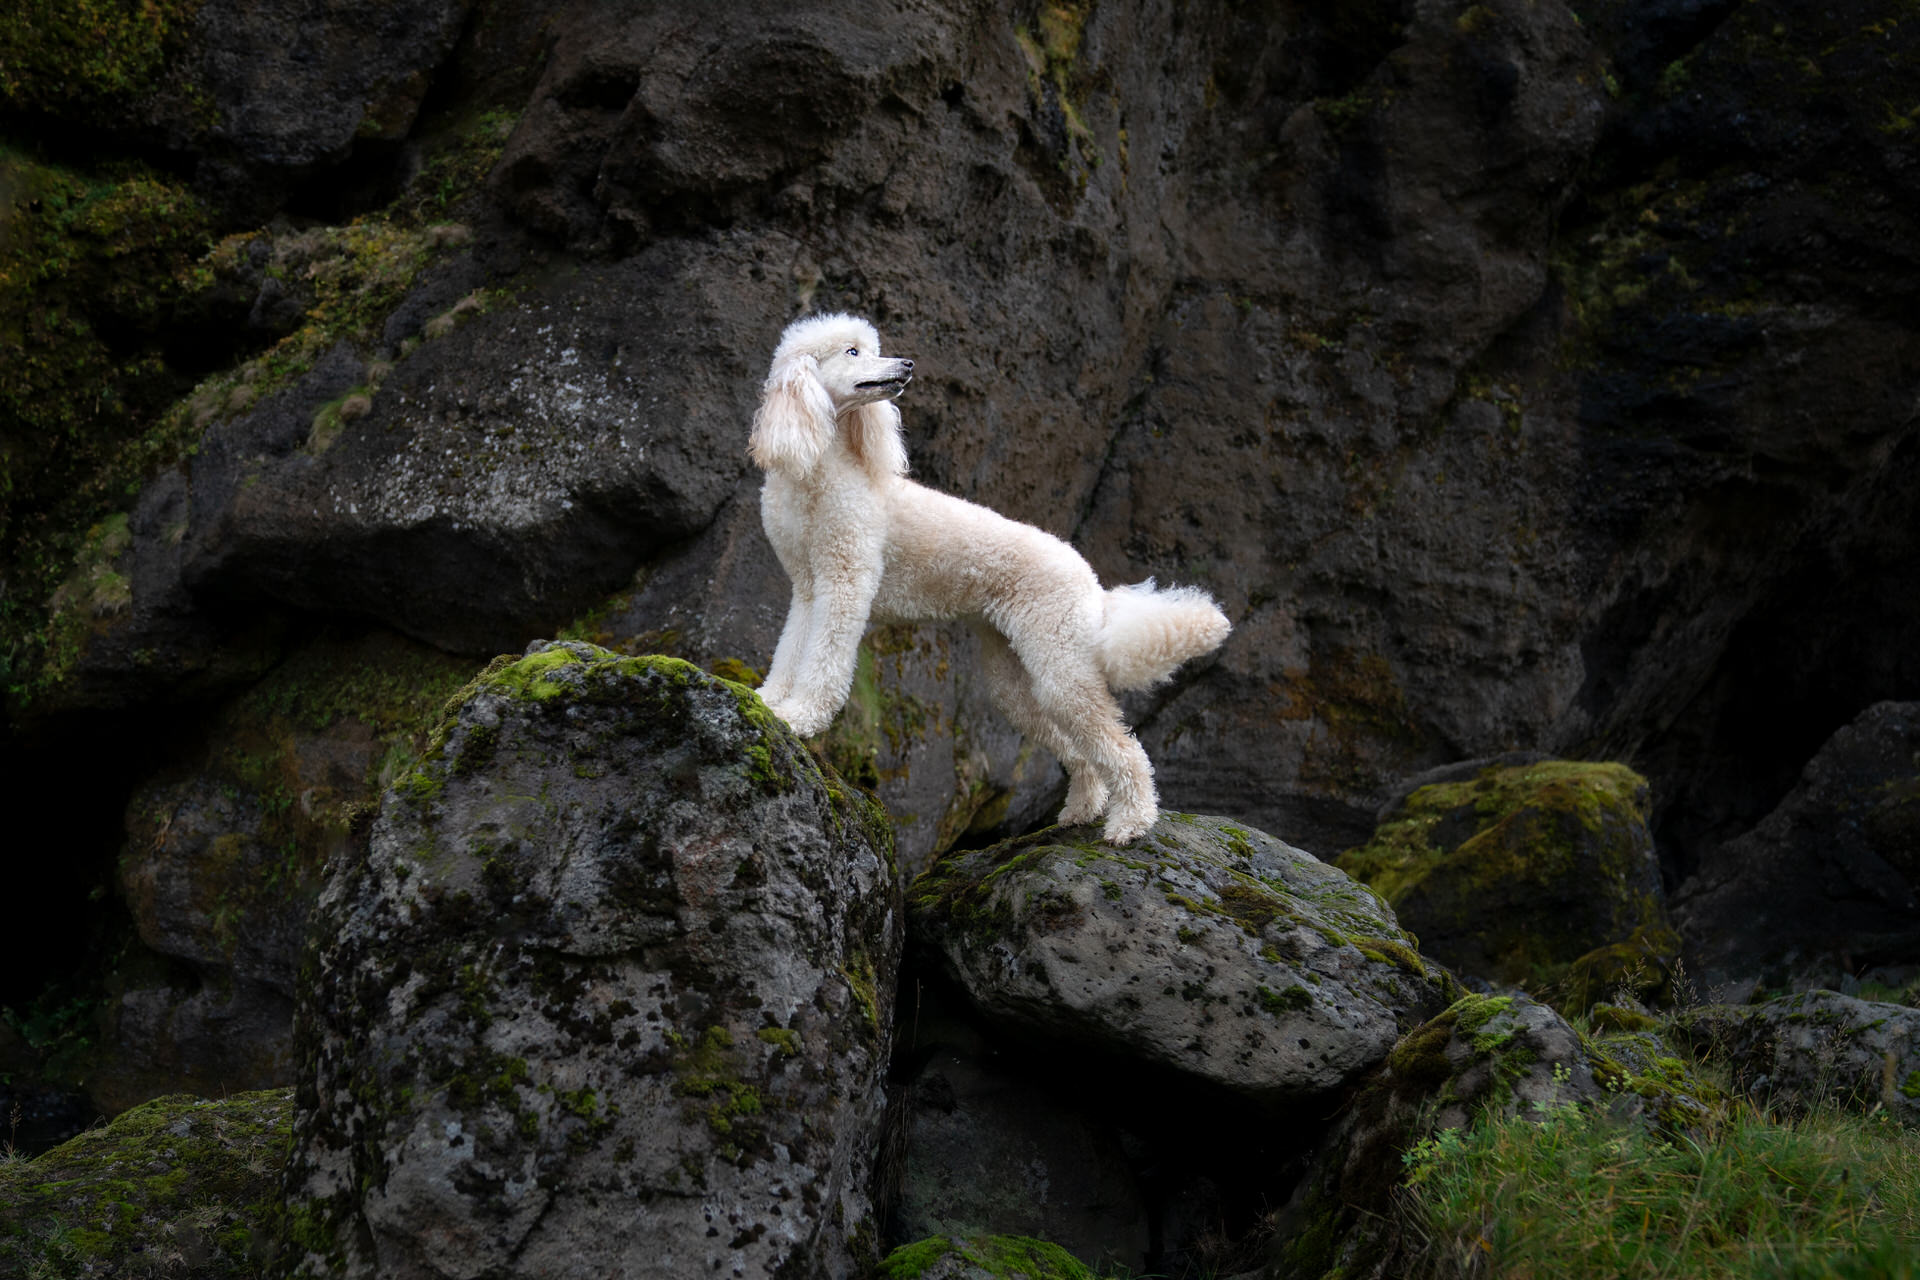 White poodle on mossy rock outdoors in Iceland